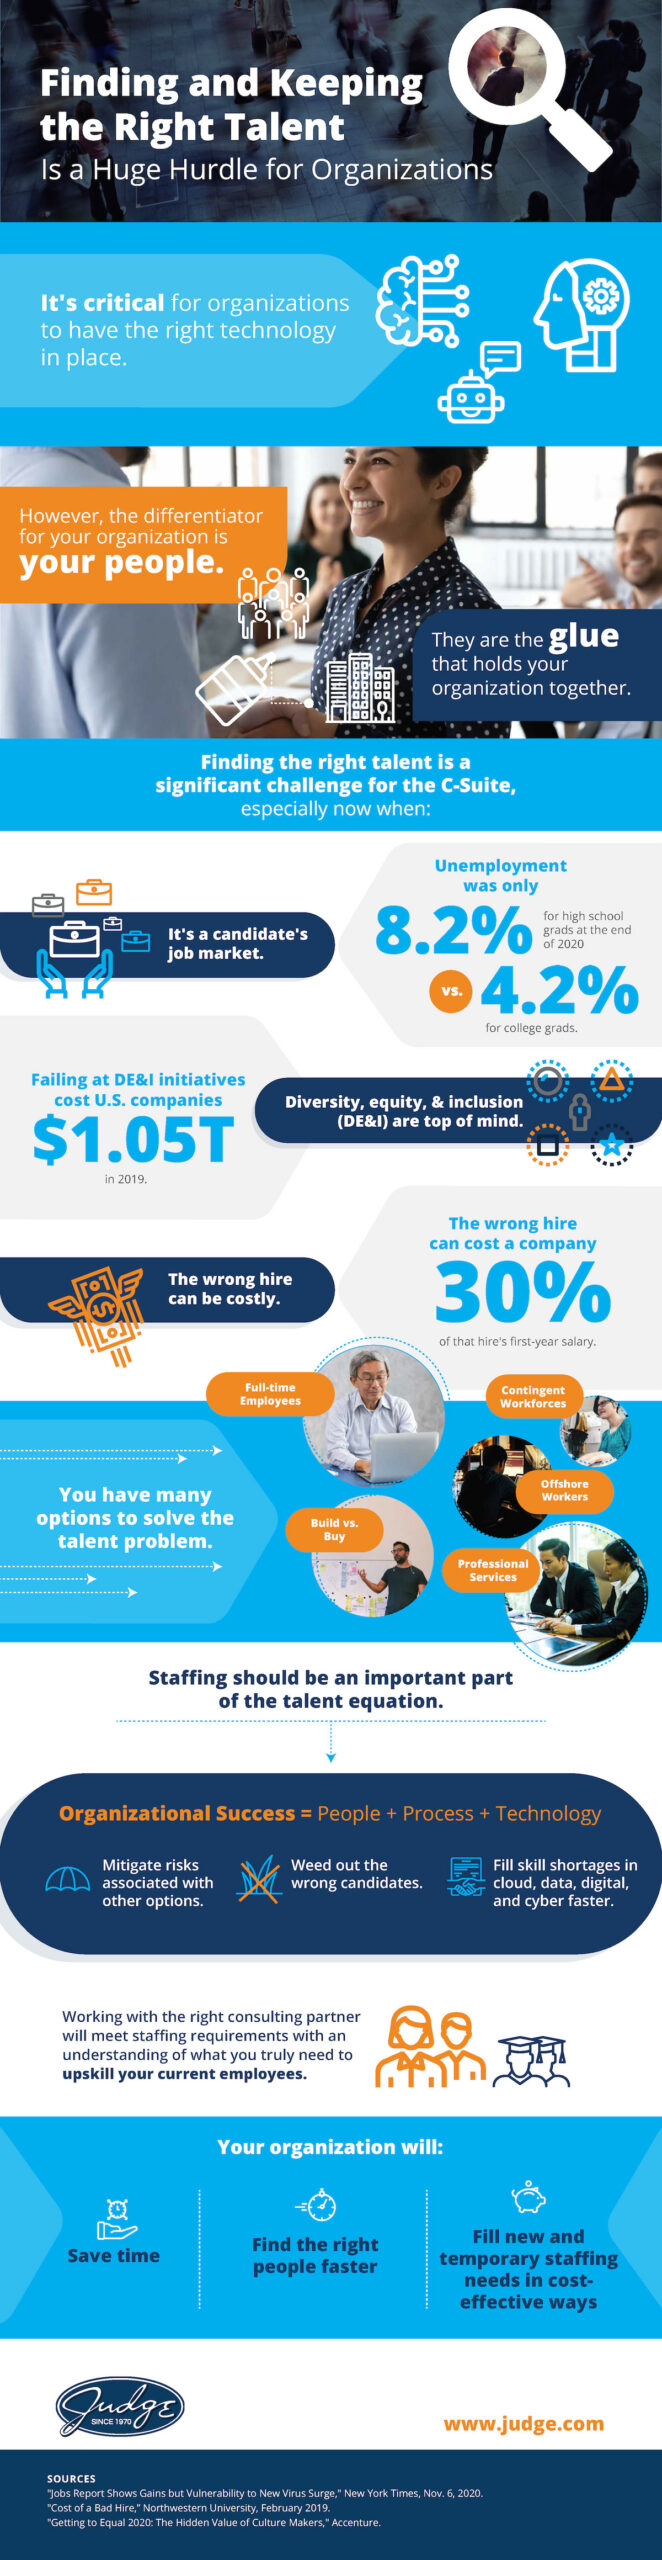 Infographic - Finding and Keeping the Right Talent is a Huge Hurdle for Organizations - The Judge Group